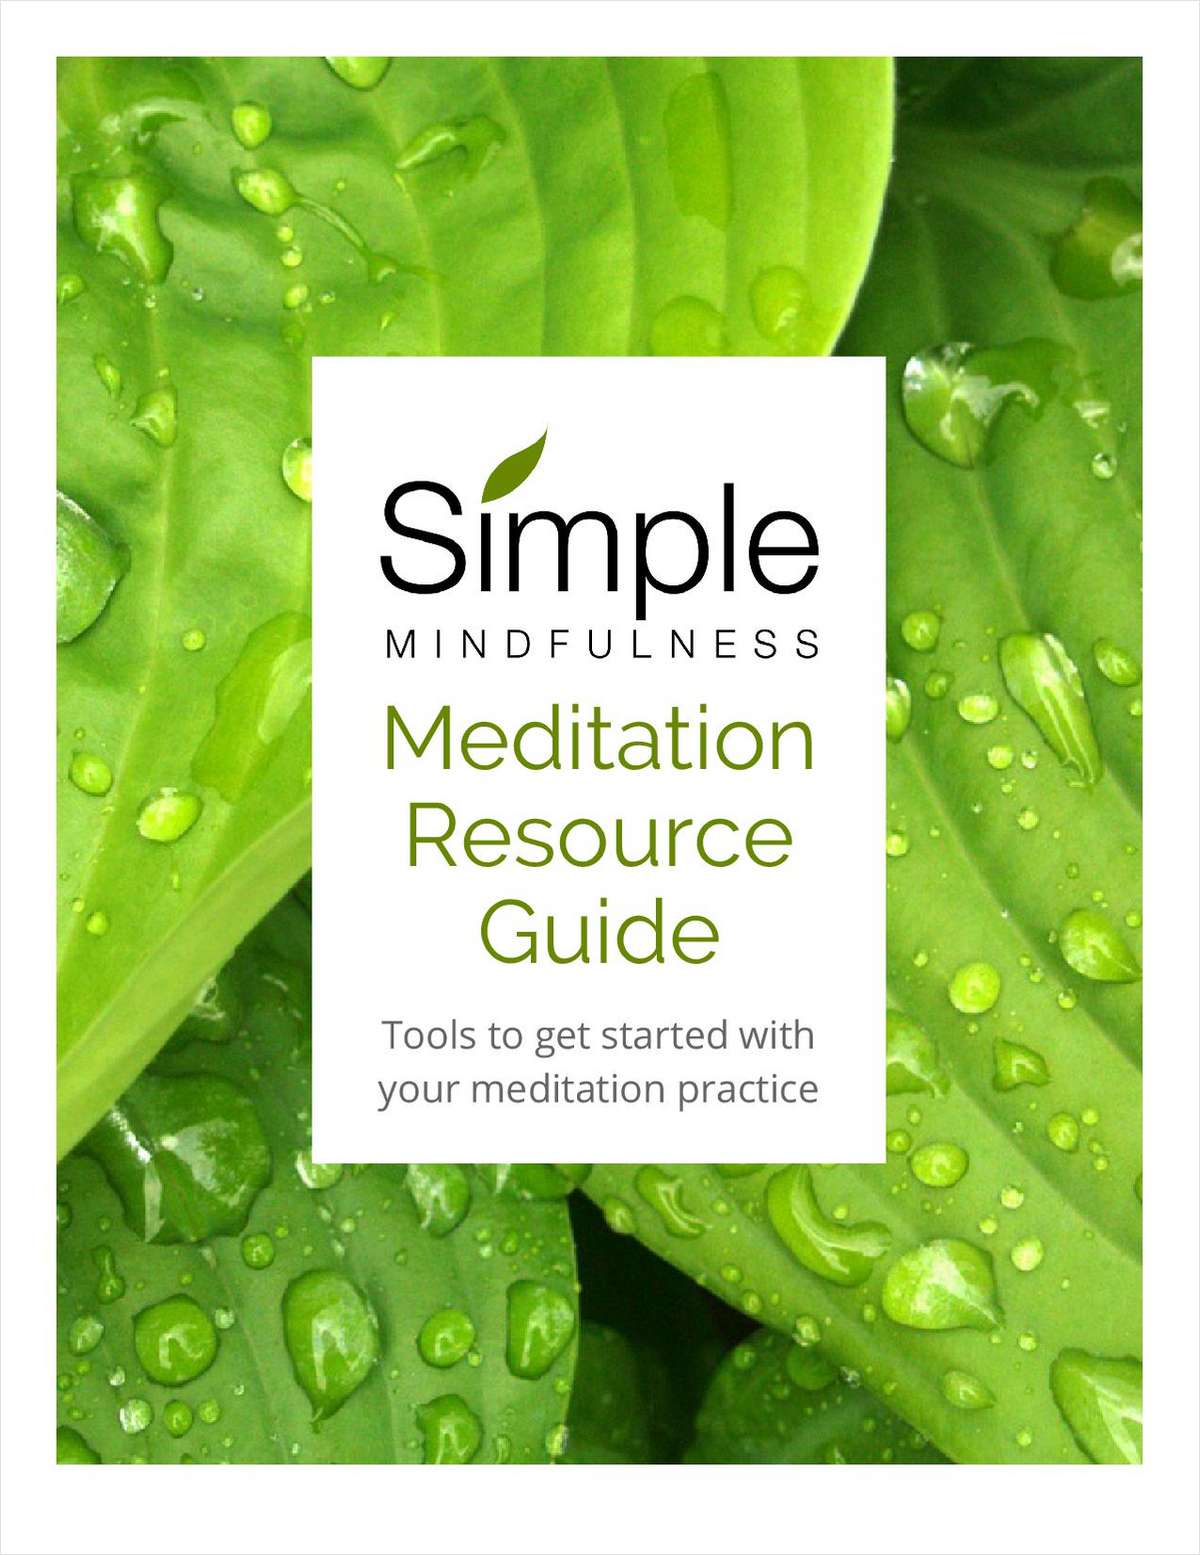 Meditation Resource Guide - Tools to Get Started with Your Meditation Practice